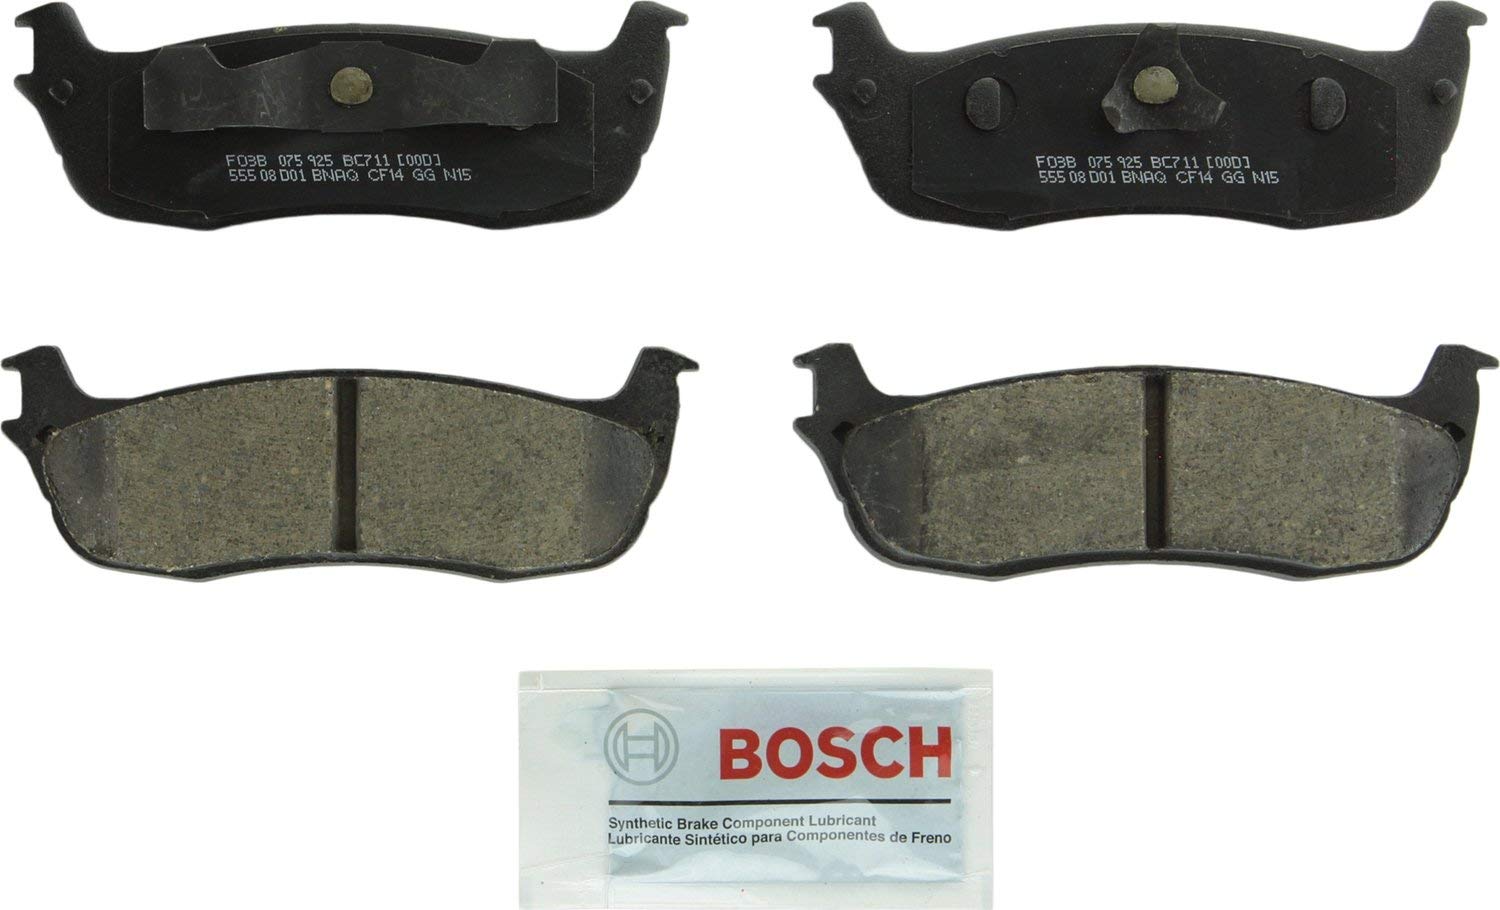 Bosch BC711 QuietCast Premium Ceramic Disc Brake Pad Set For Select Ford Expedition, F-150, F-150 Heritage, F-250, F-250 HD; Lincoln Blackwood, Navigator, Town Car; Rear